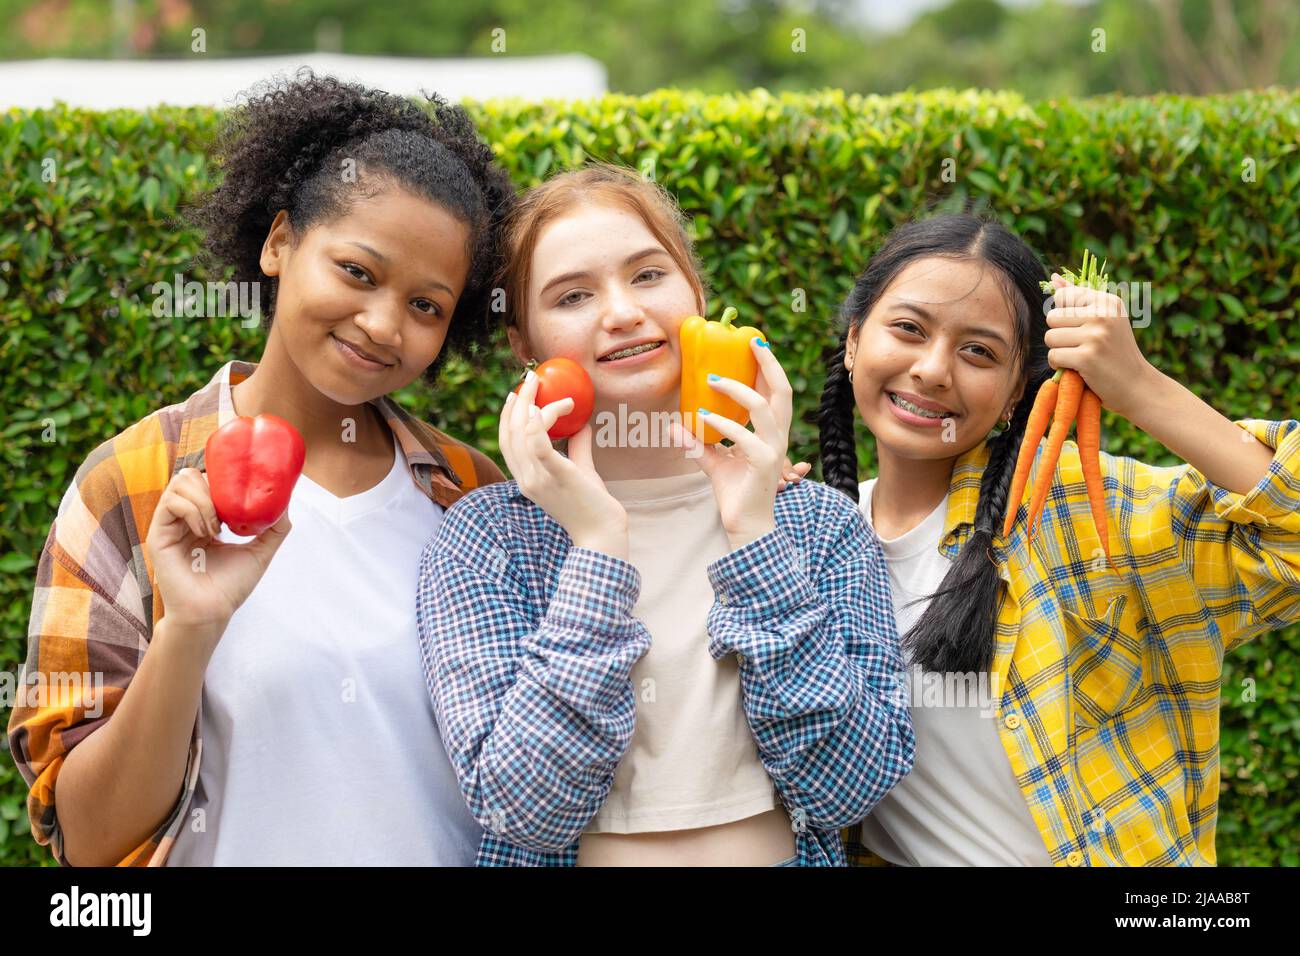 teen girl mix race happy smile with vegetables fresh from farm agriculture eating healthy concept Stock Photo